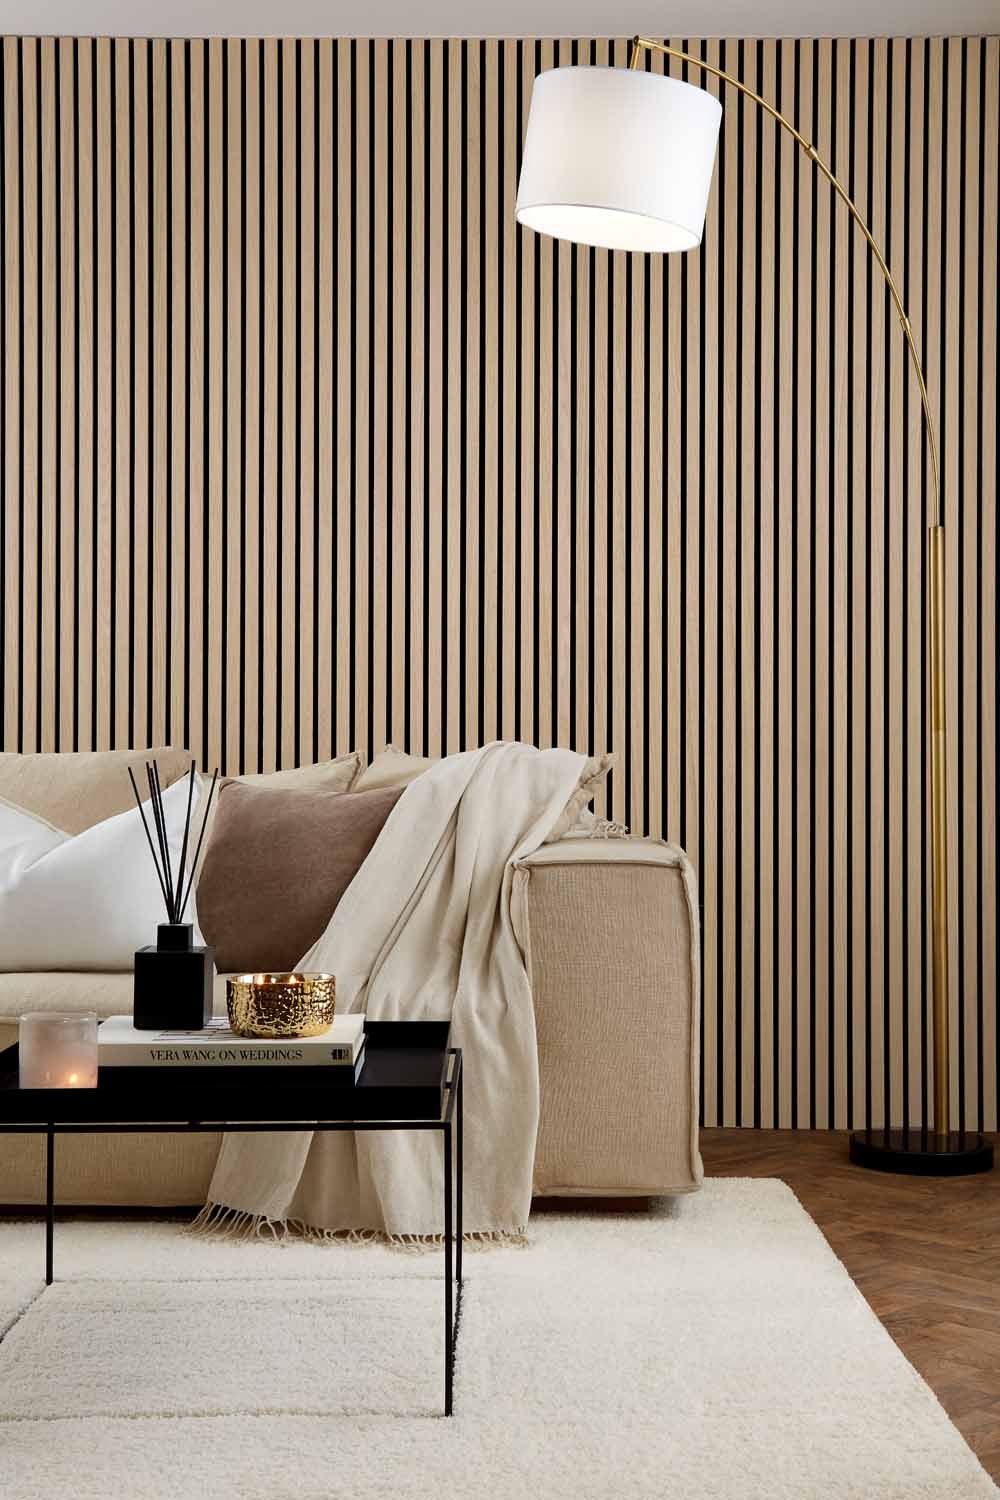 Natural Oak Acoustic SlatWall Panels from Naturewall in a modern living room setting, behind sofa and coffee table.